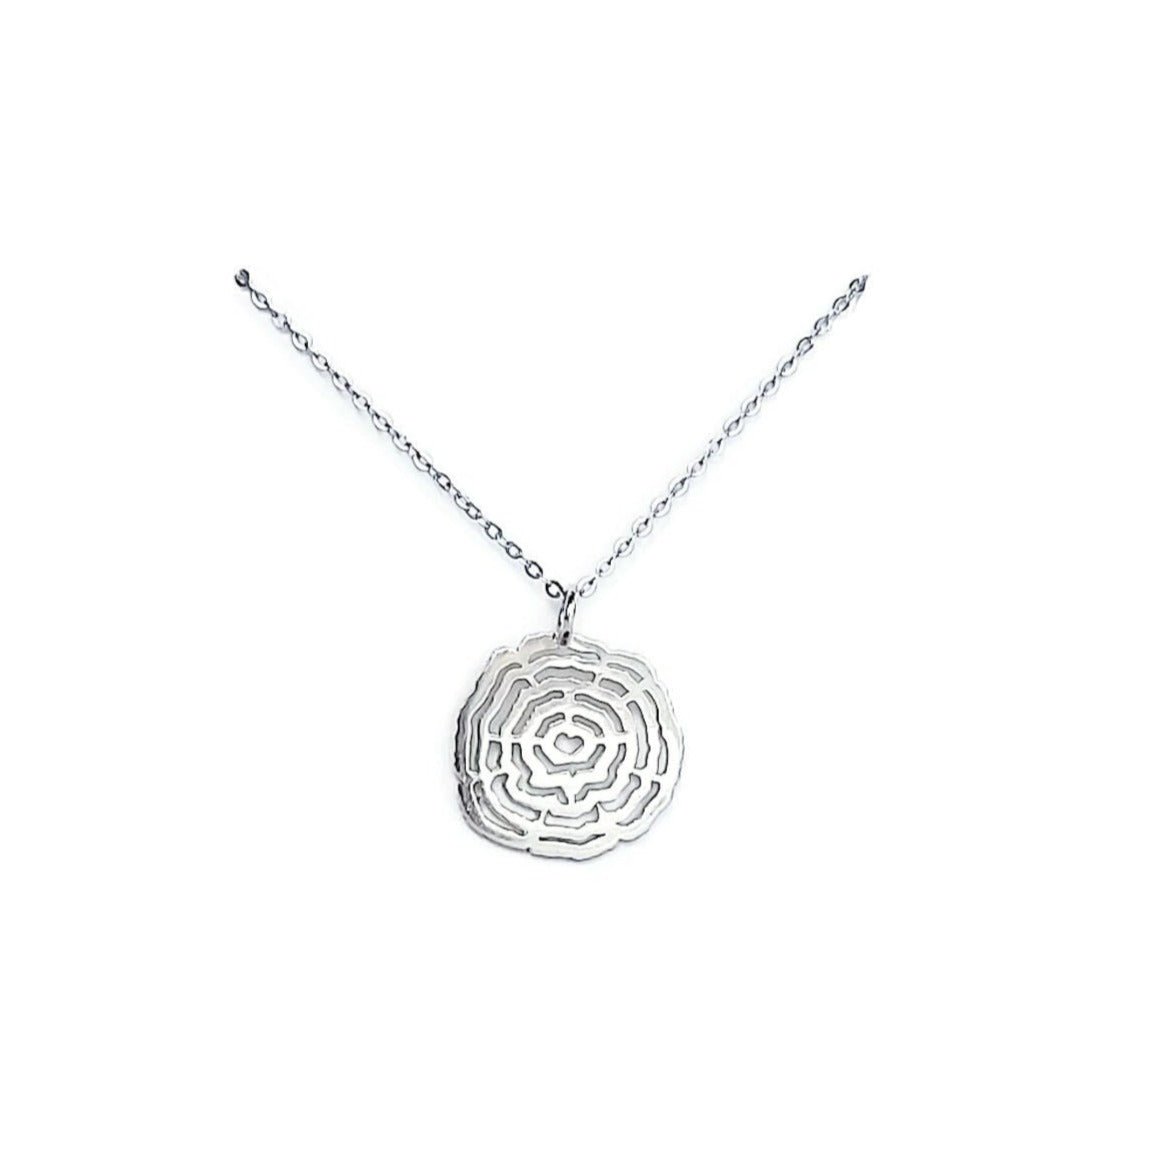 925 Sterling Silver Vita Tree ring pendant necklace with heart center cut out on white background